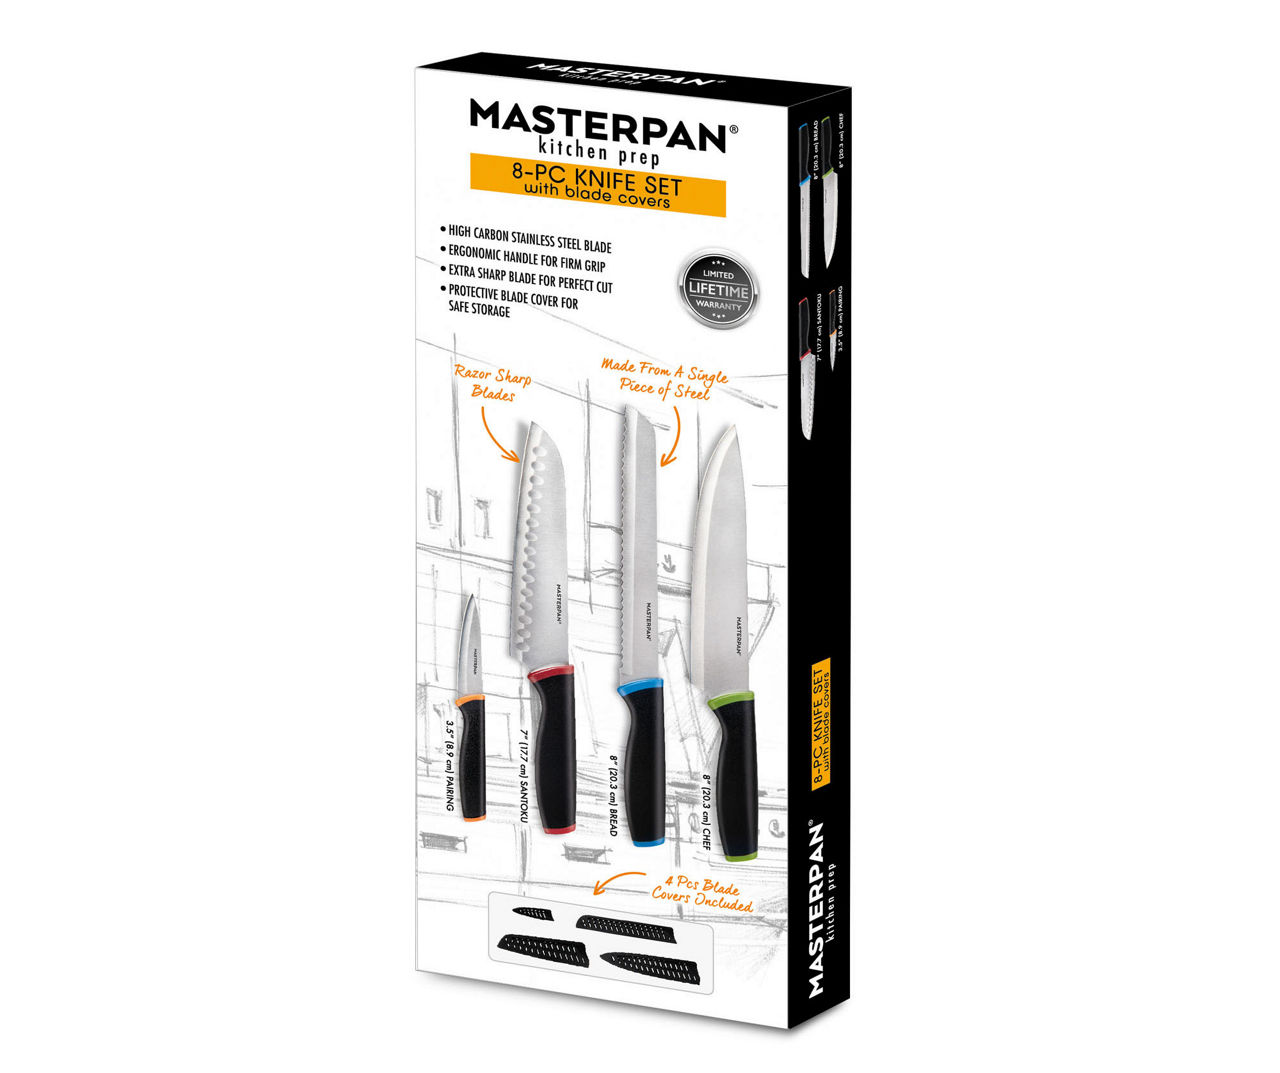 MasterPan Knife Set with Protective Blade Covers, Stainless Steel Blade & Non-Slip Handle - 8 Piece